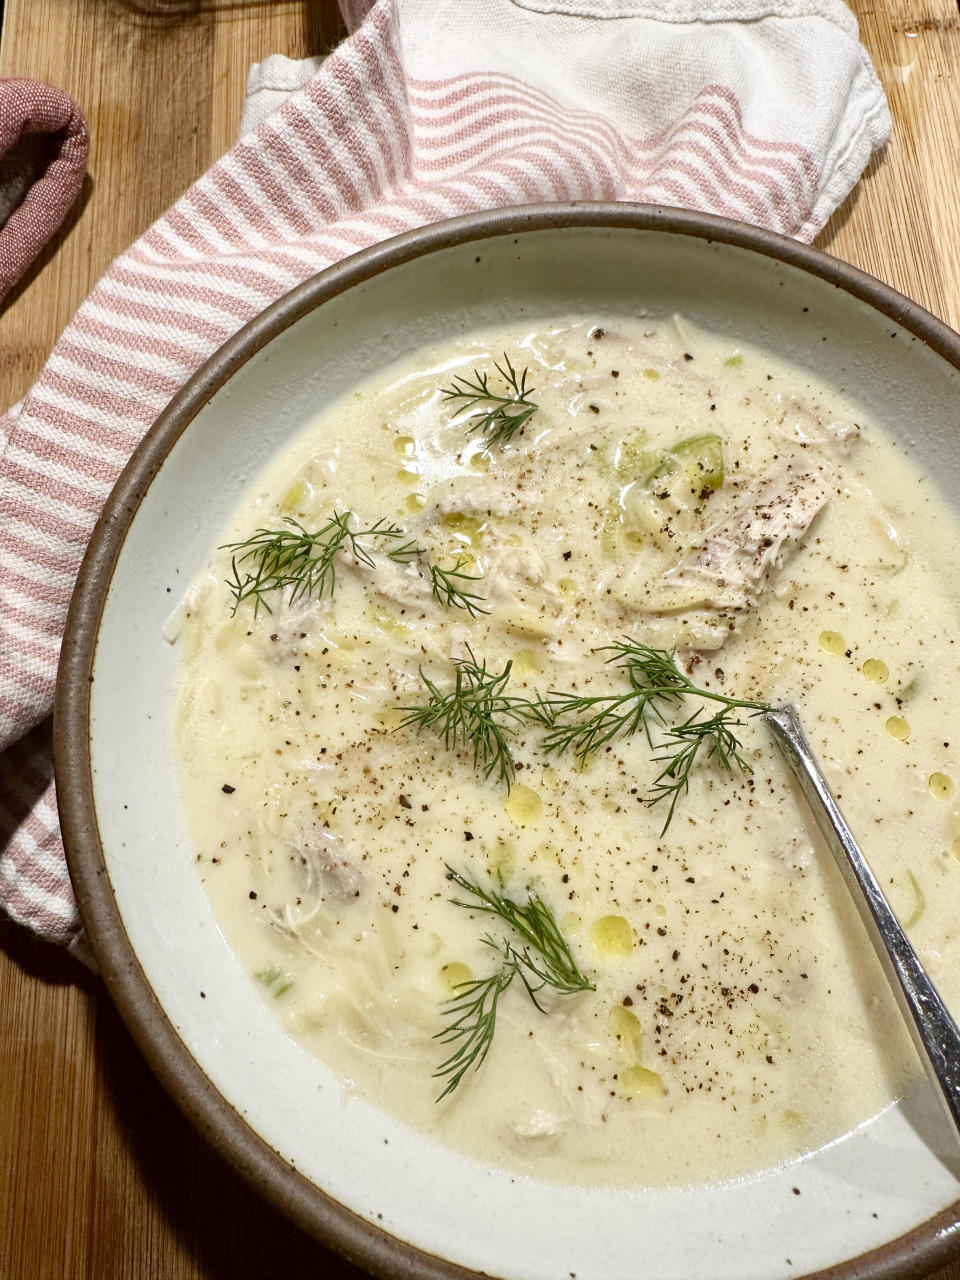 A bowl of creamy soup garnished with fresh dill